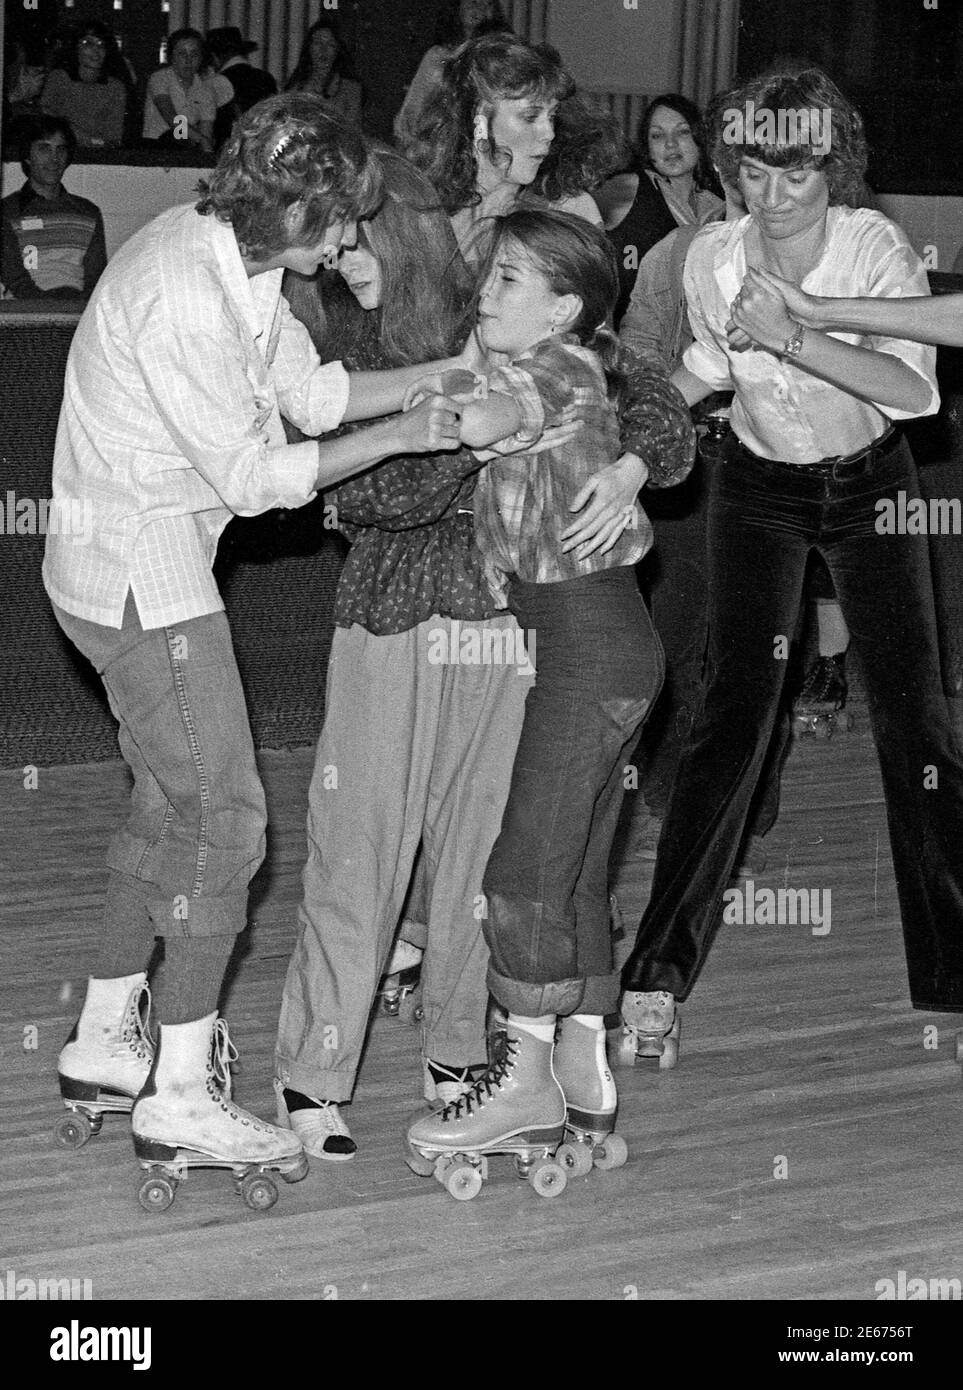 Quinn Cummings crashes into Penny Marshall with Pam Dawber in back at Flippers Roller boogie Palace in 1978 Stock Photo